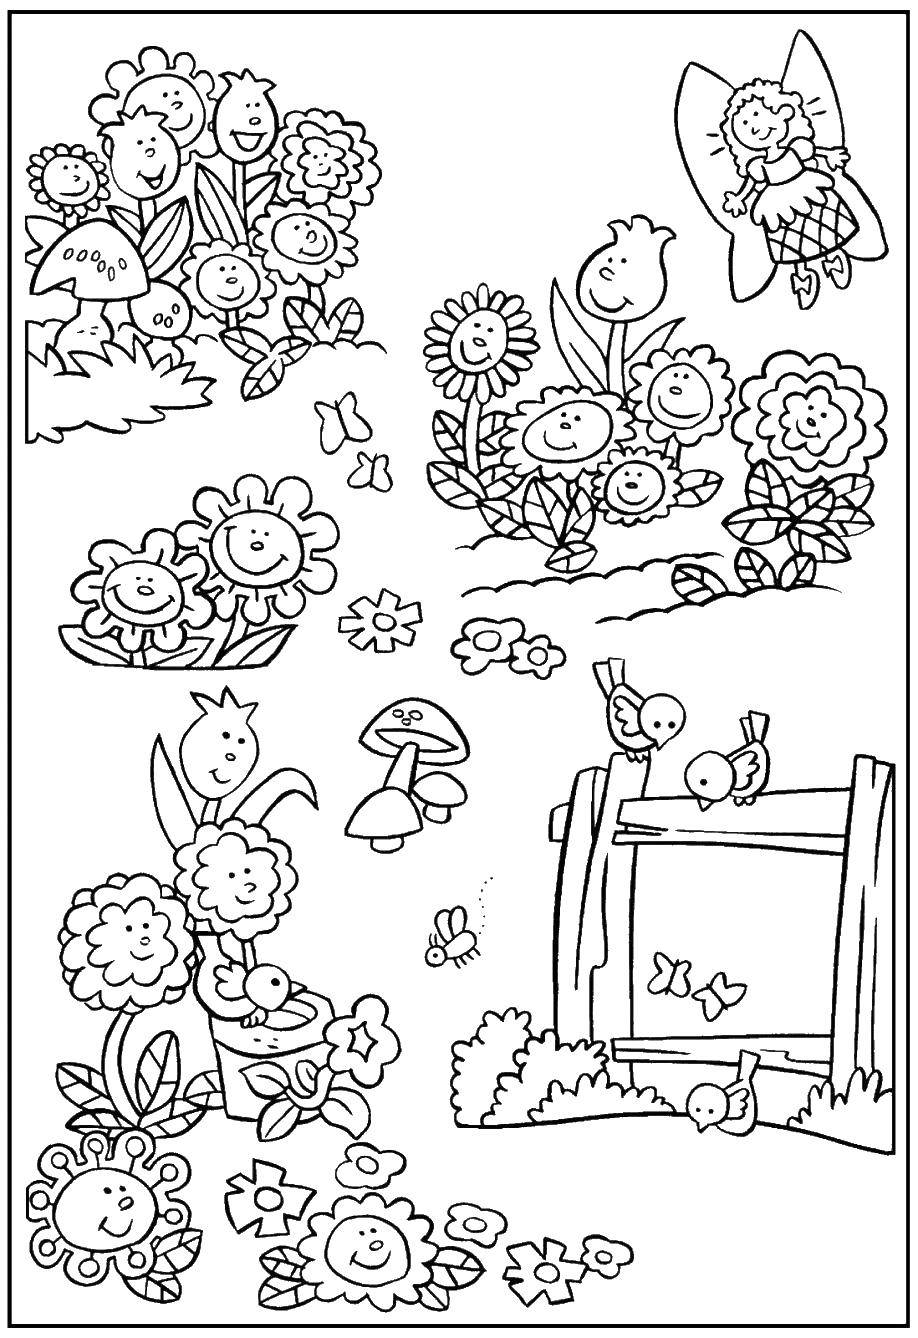 Coloring Many Cvety, fairy and birds. Category Nature. Tags:  nature, birds, flowers, fairy.